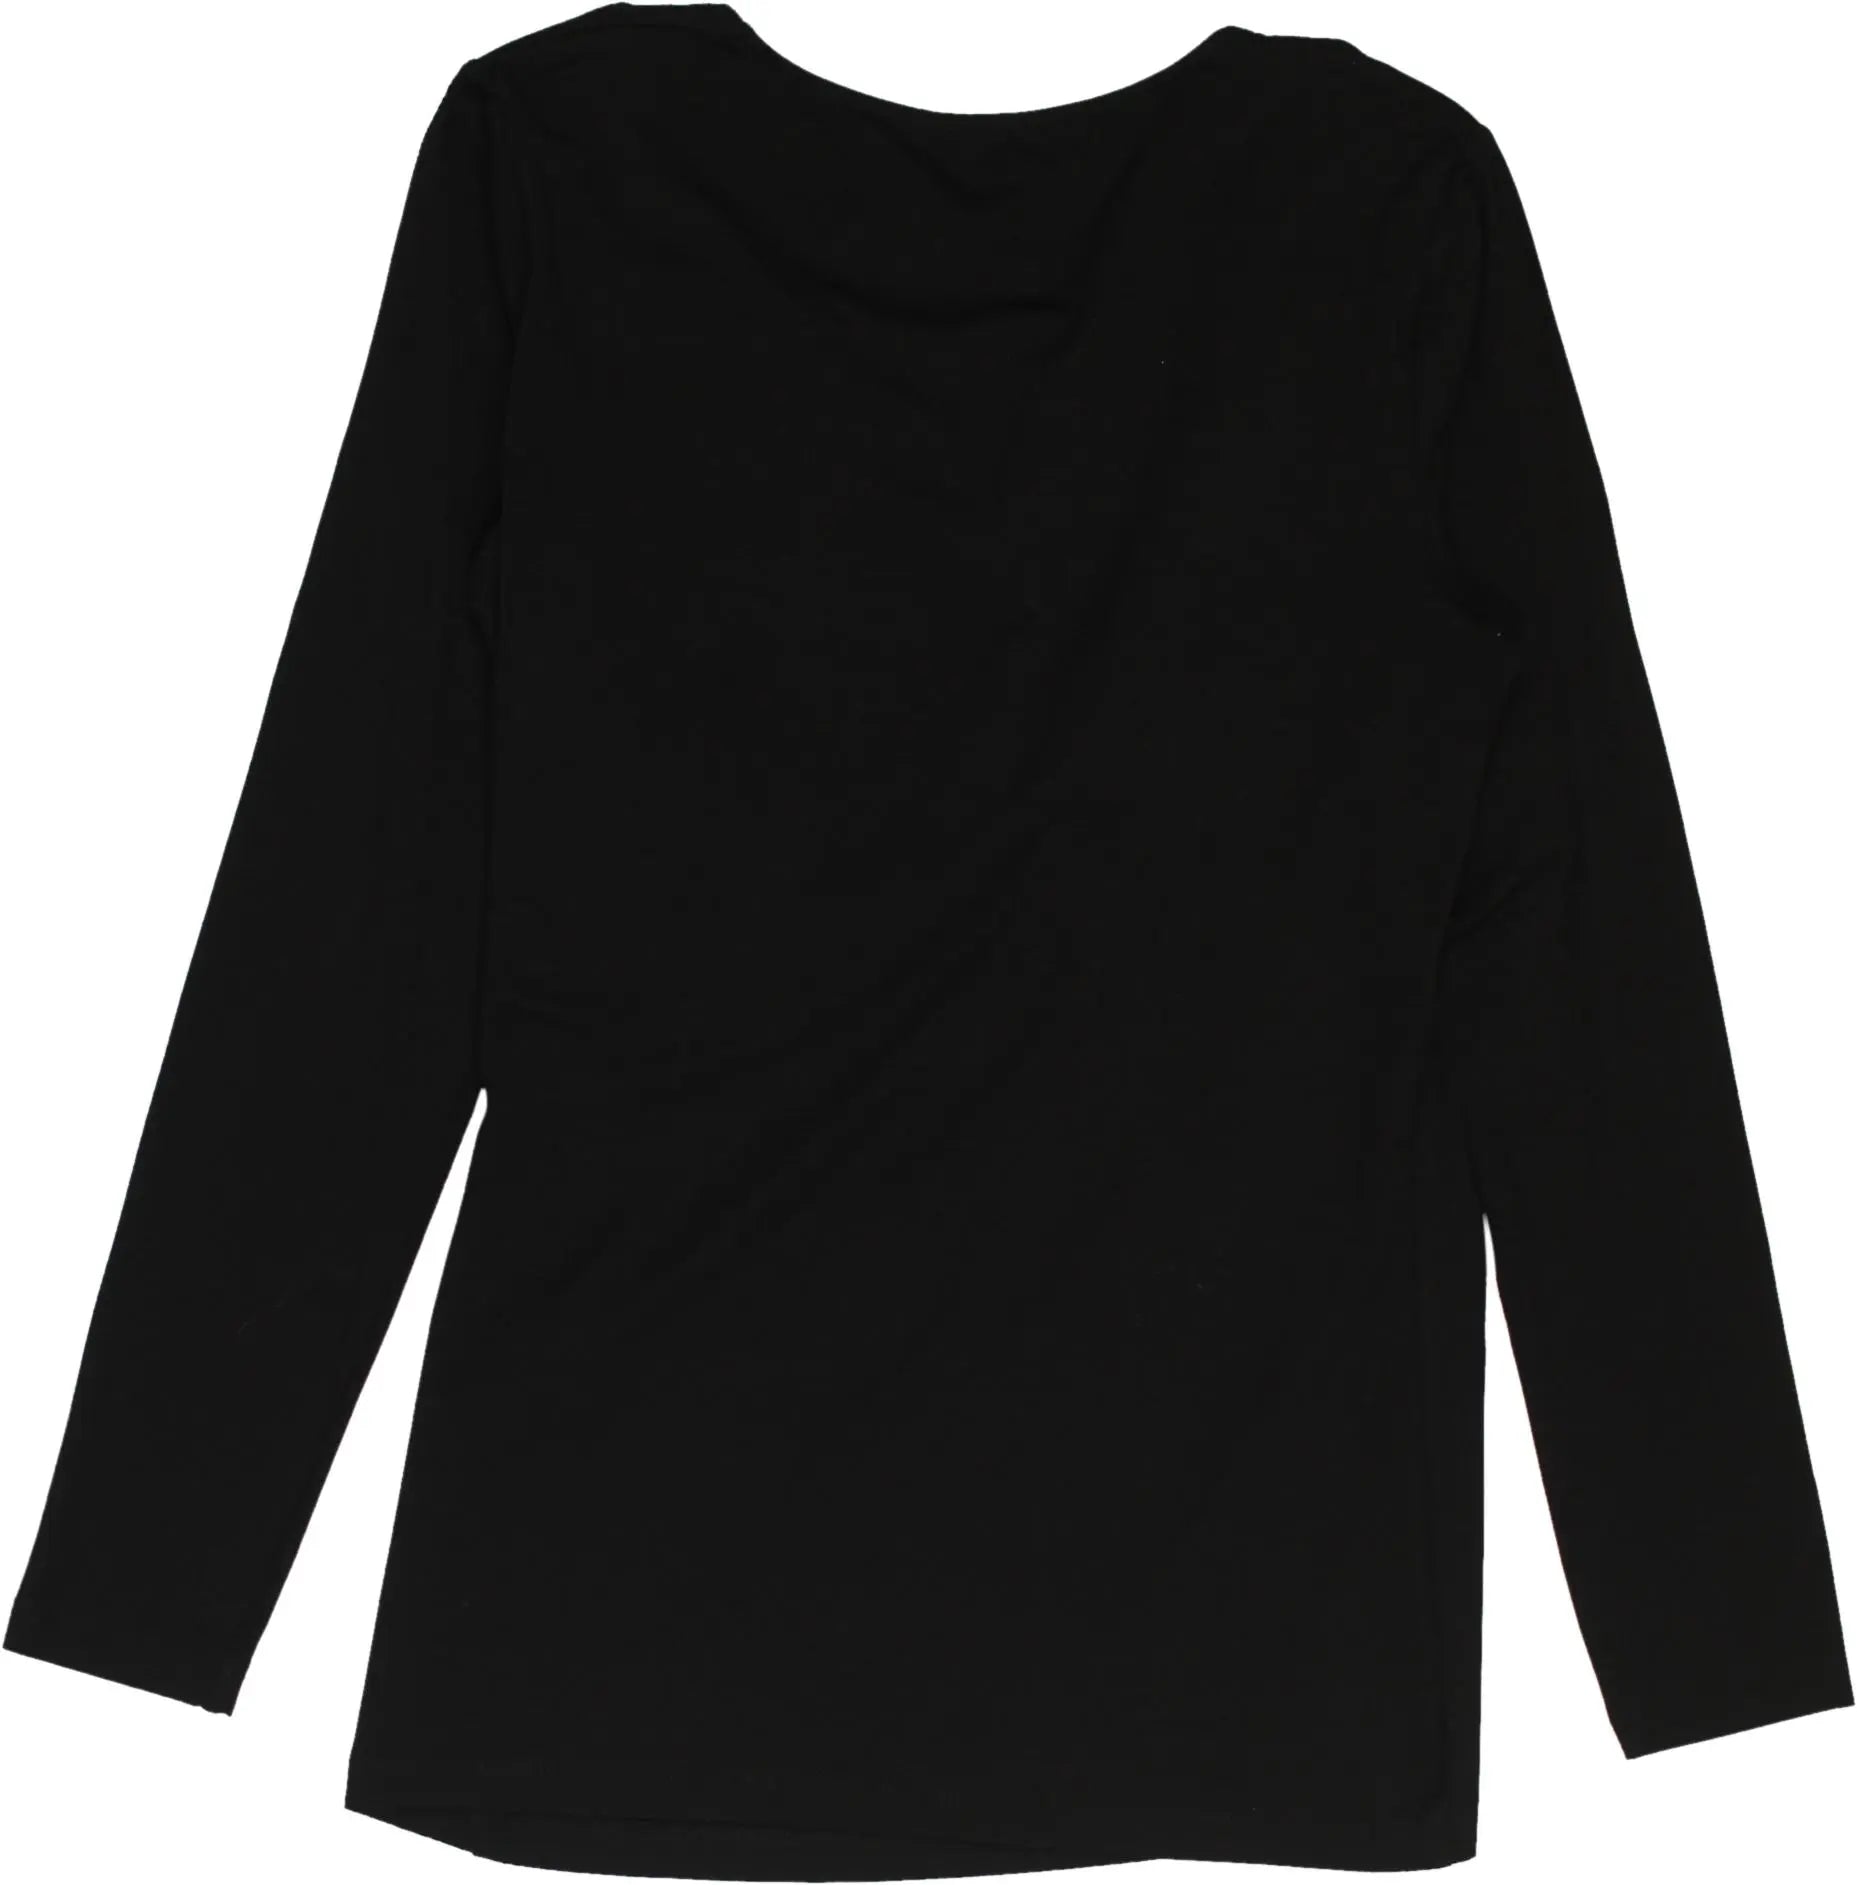 Sao Paulo - Black long sleeve top- ThriftTale.com - Vintage and second handclothing